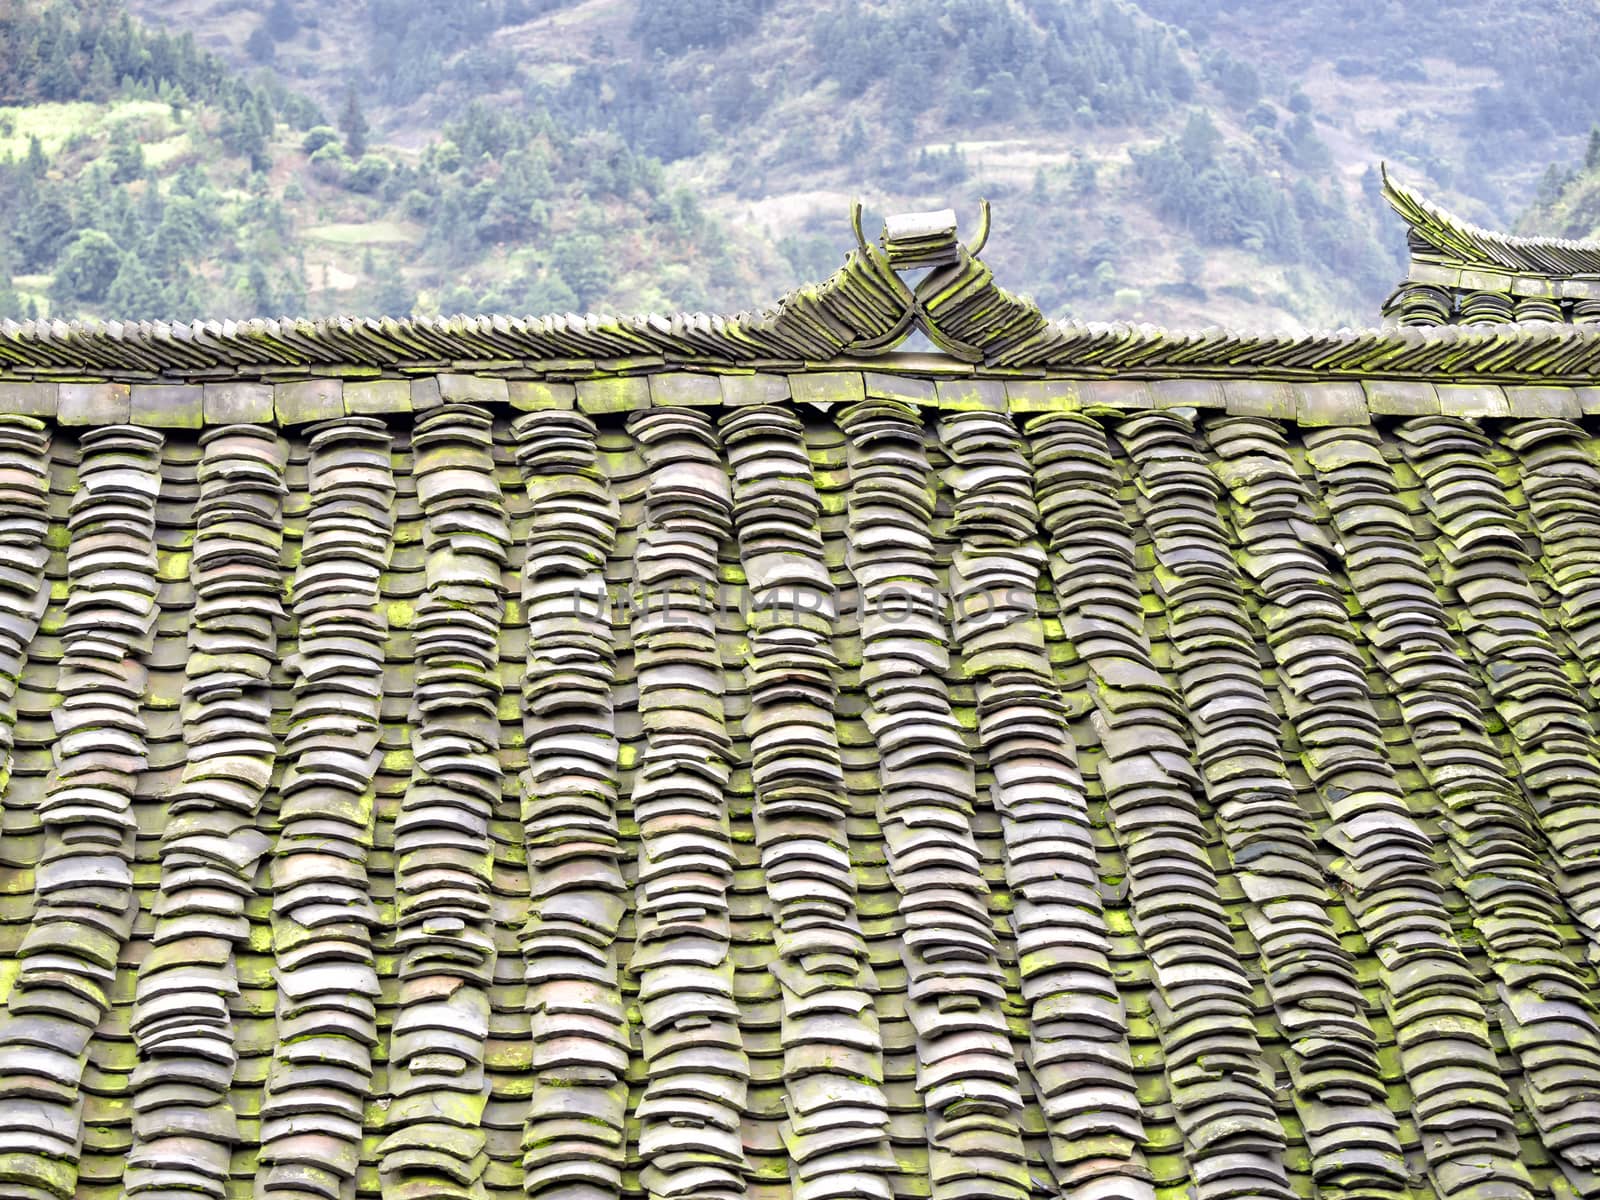 Ancient Roof Tile by leieng